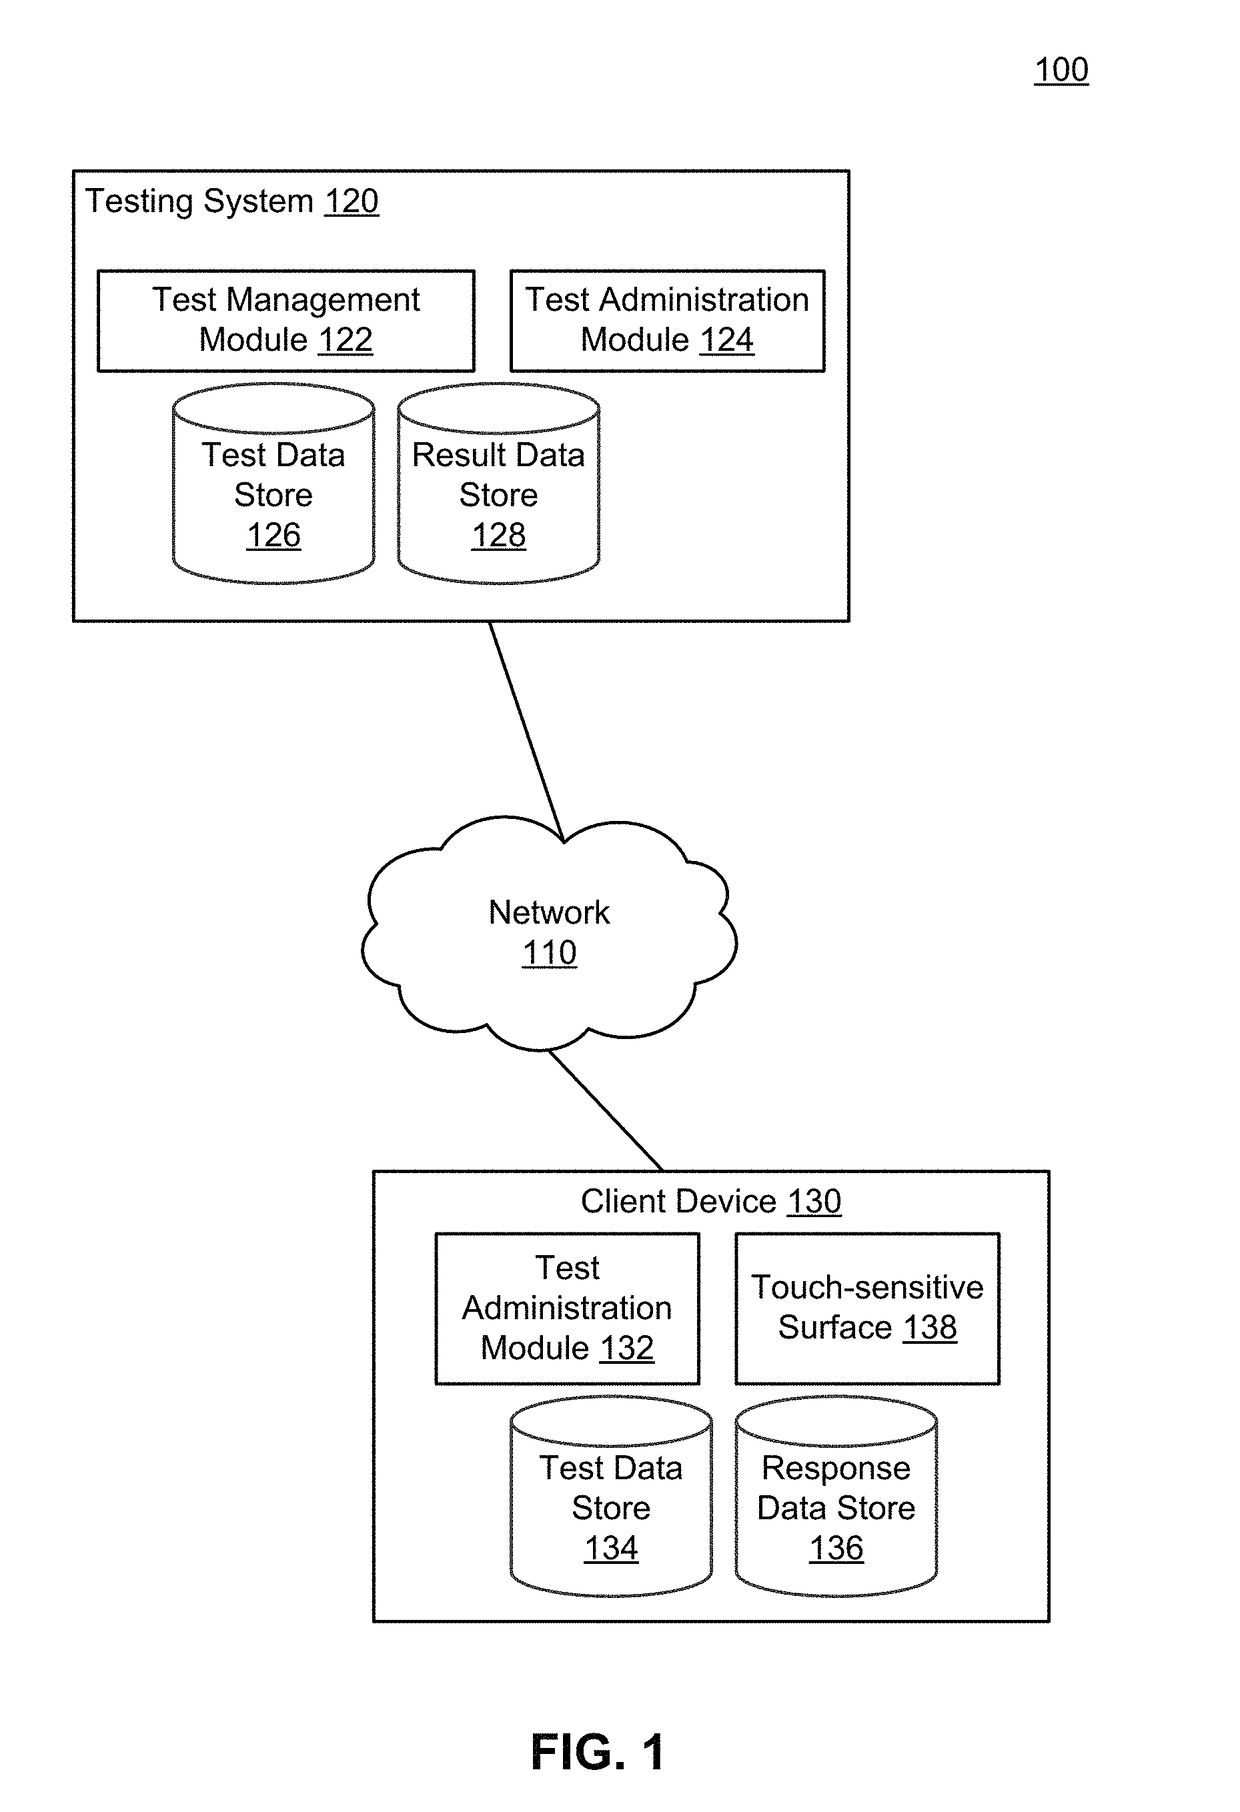 Motion restriction and measurement for self-administered cognitive tests